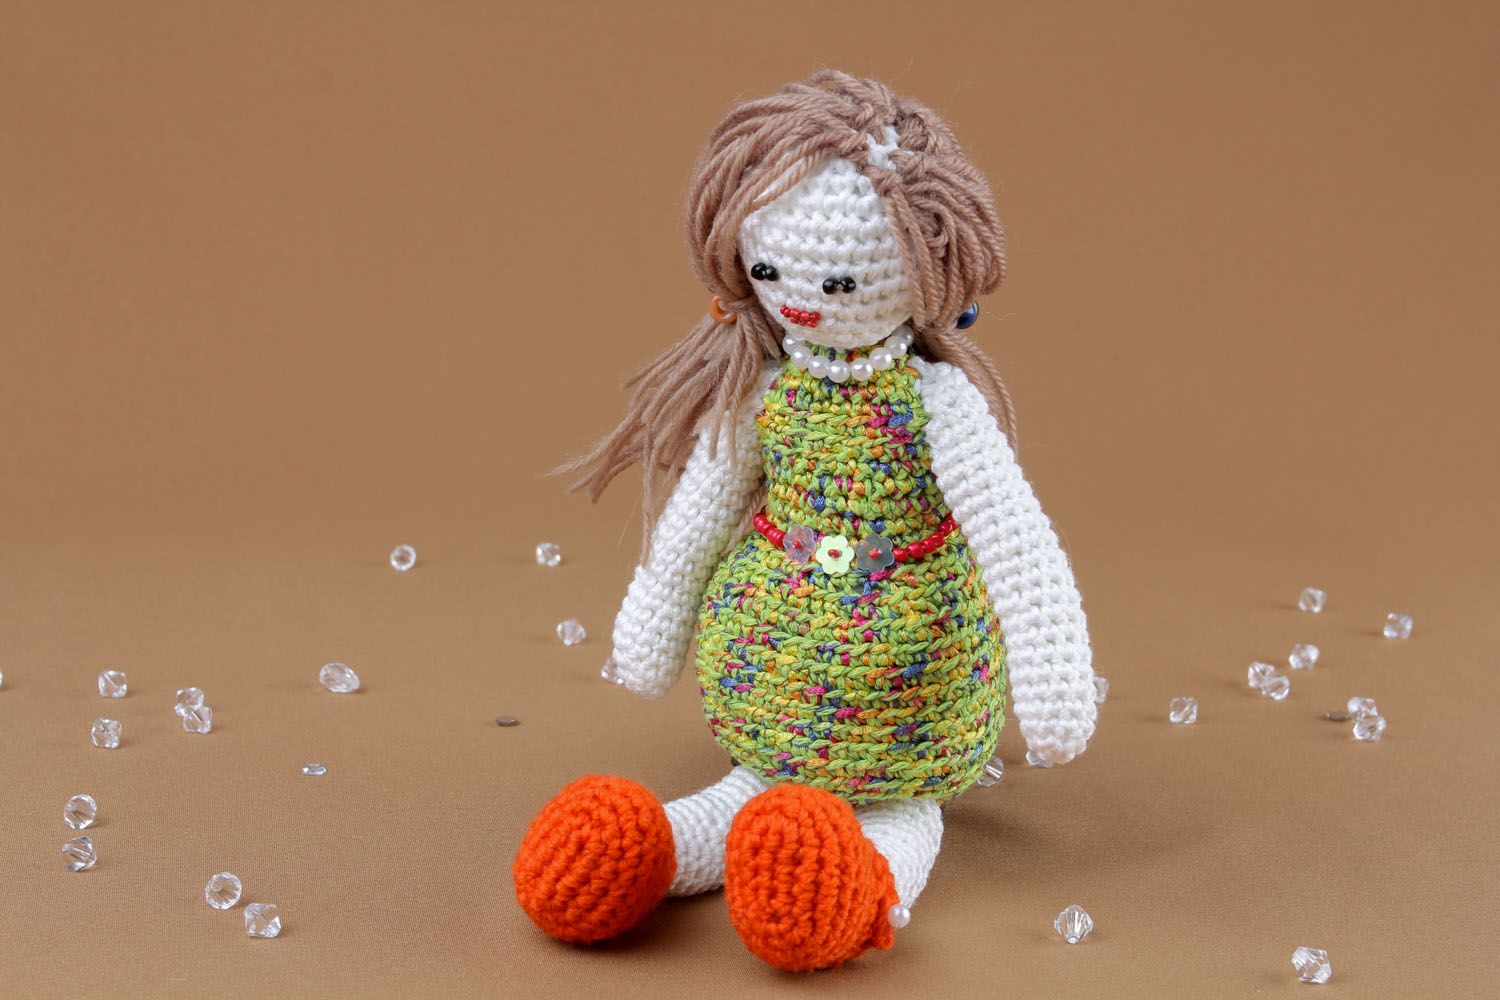 Crocheted author's doll photo 1